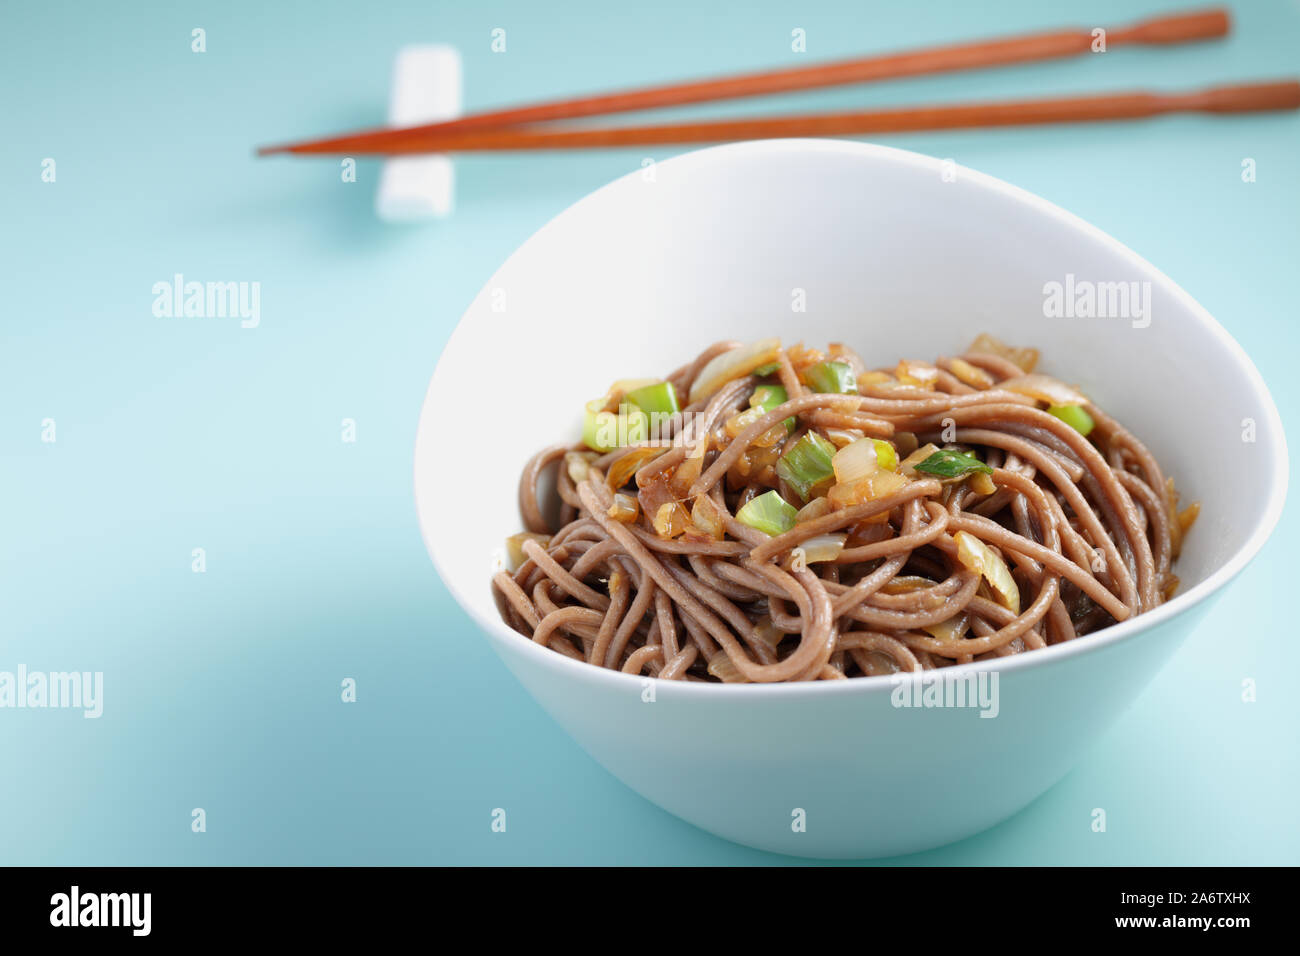 Bowl of soba noodles with fried green onions Stock Photo